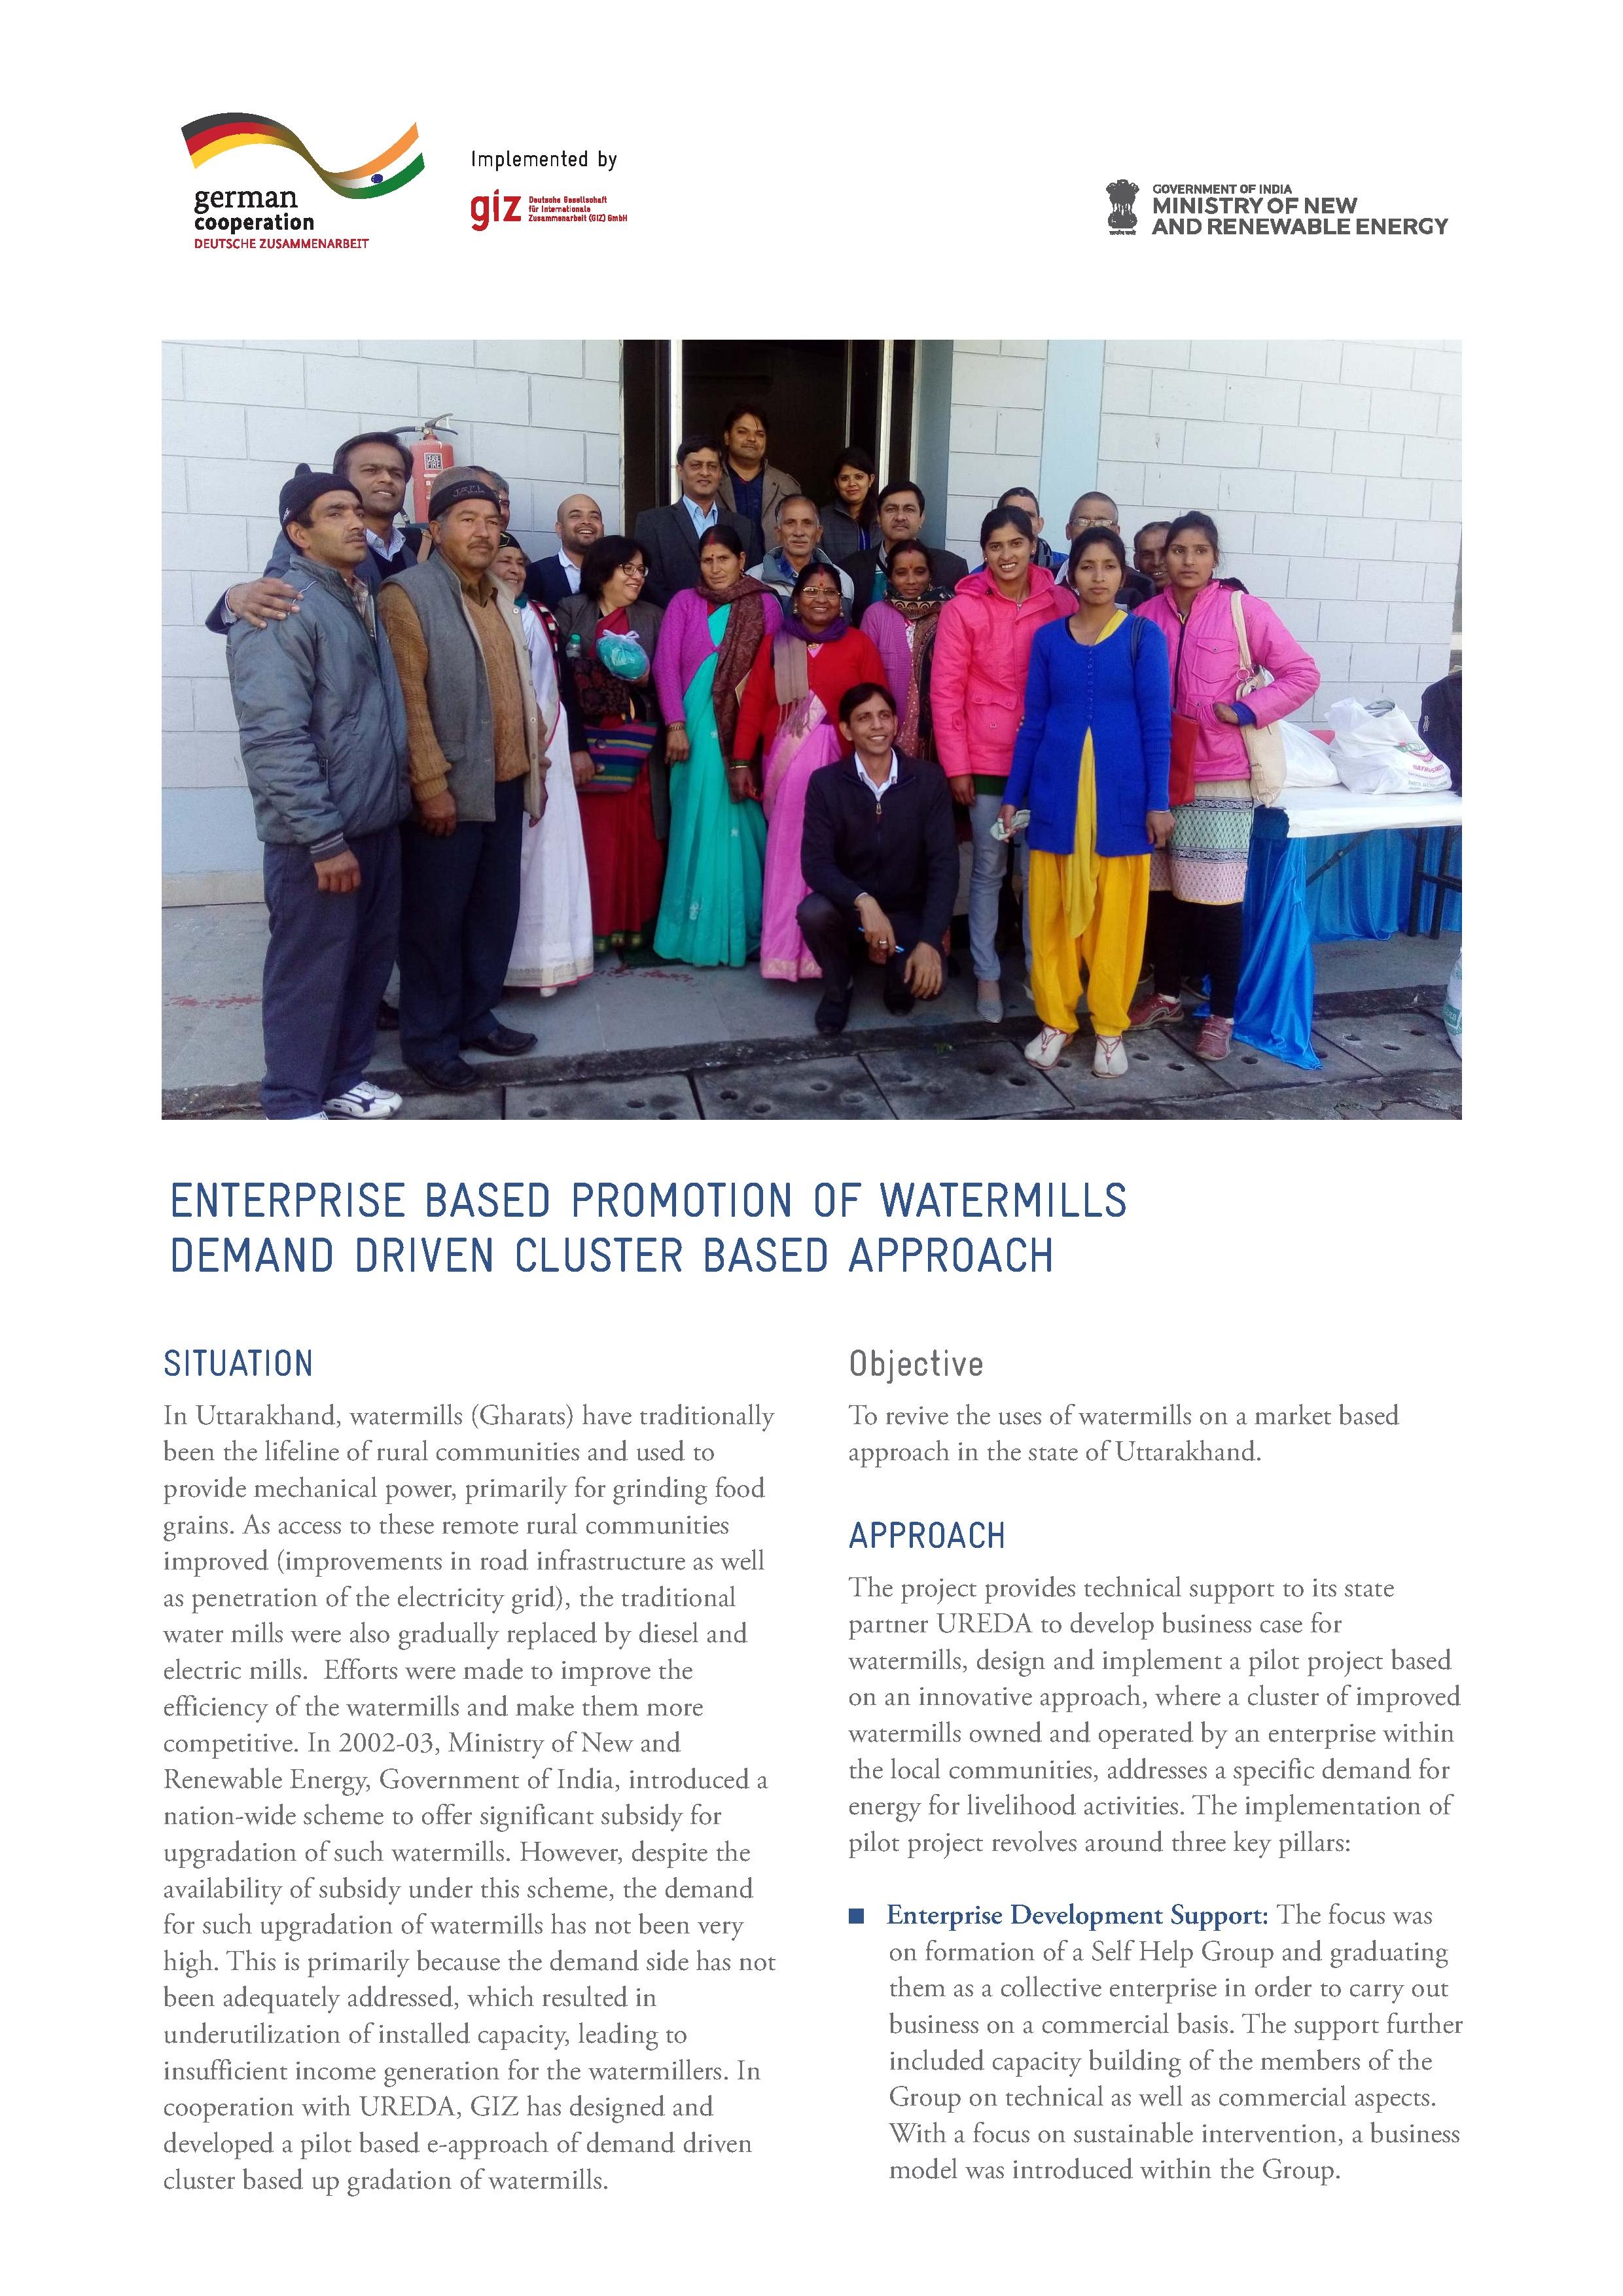 Enterprise based promotion of watermills (Pico hydro) in India